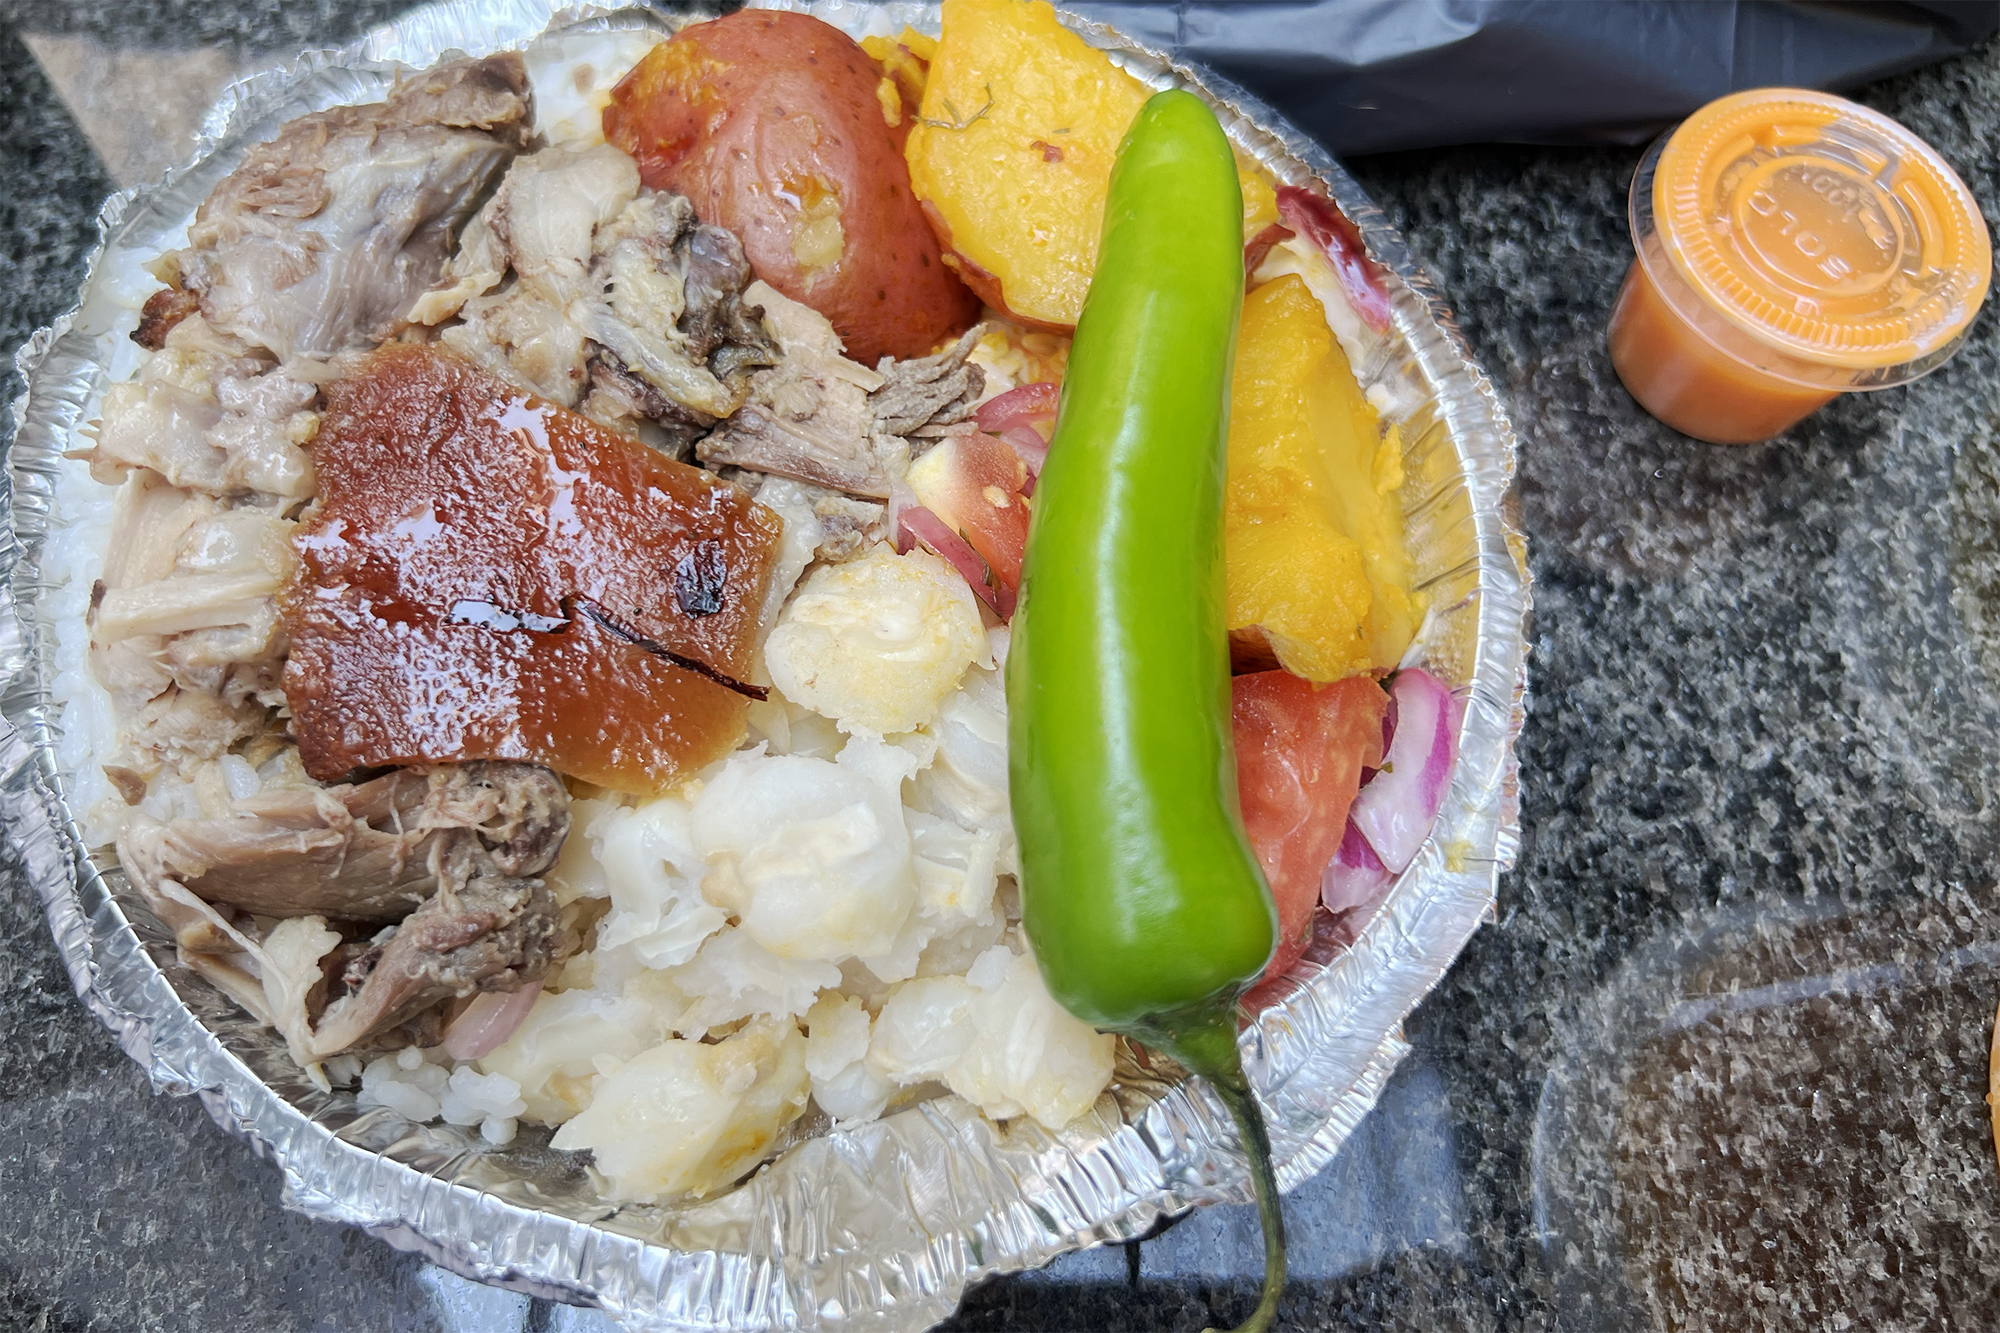 NYC: Construction Site Lunch vendors - The best street lunch you've never heard of 